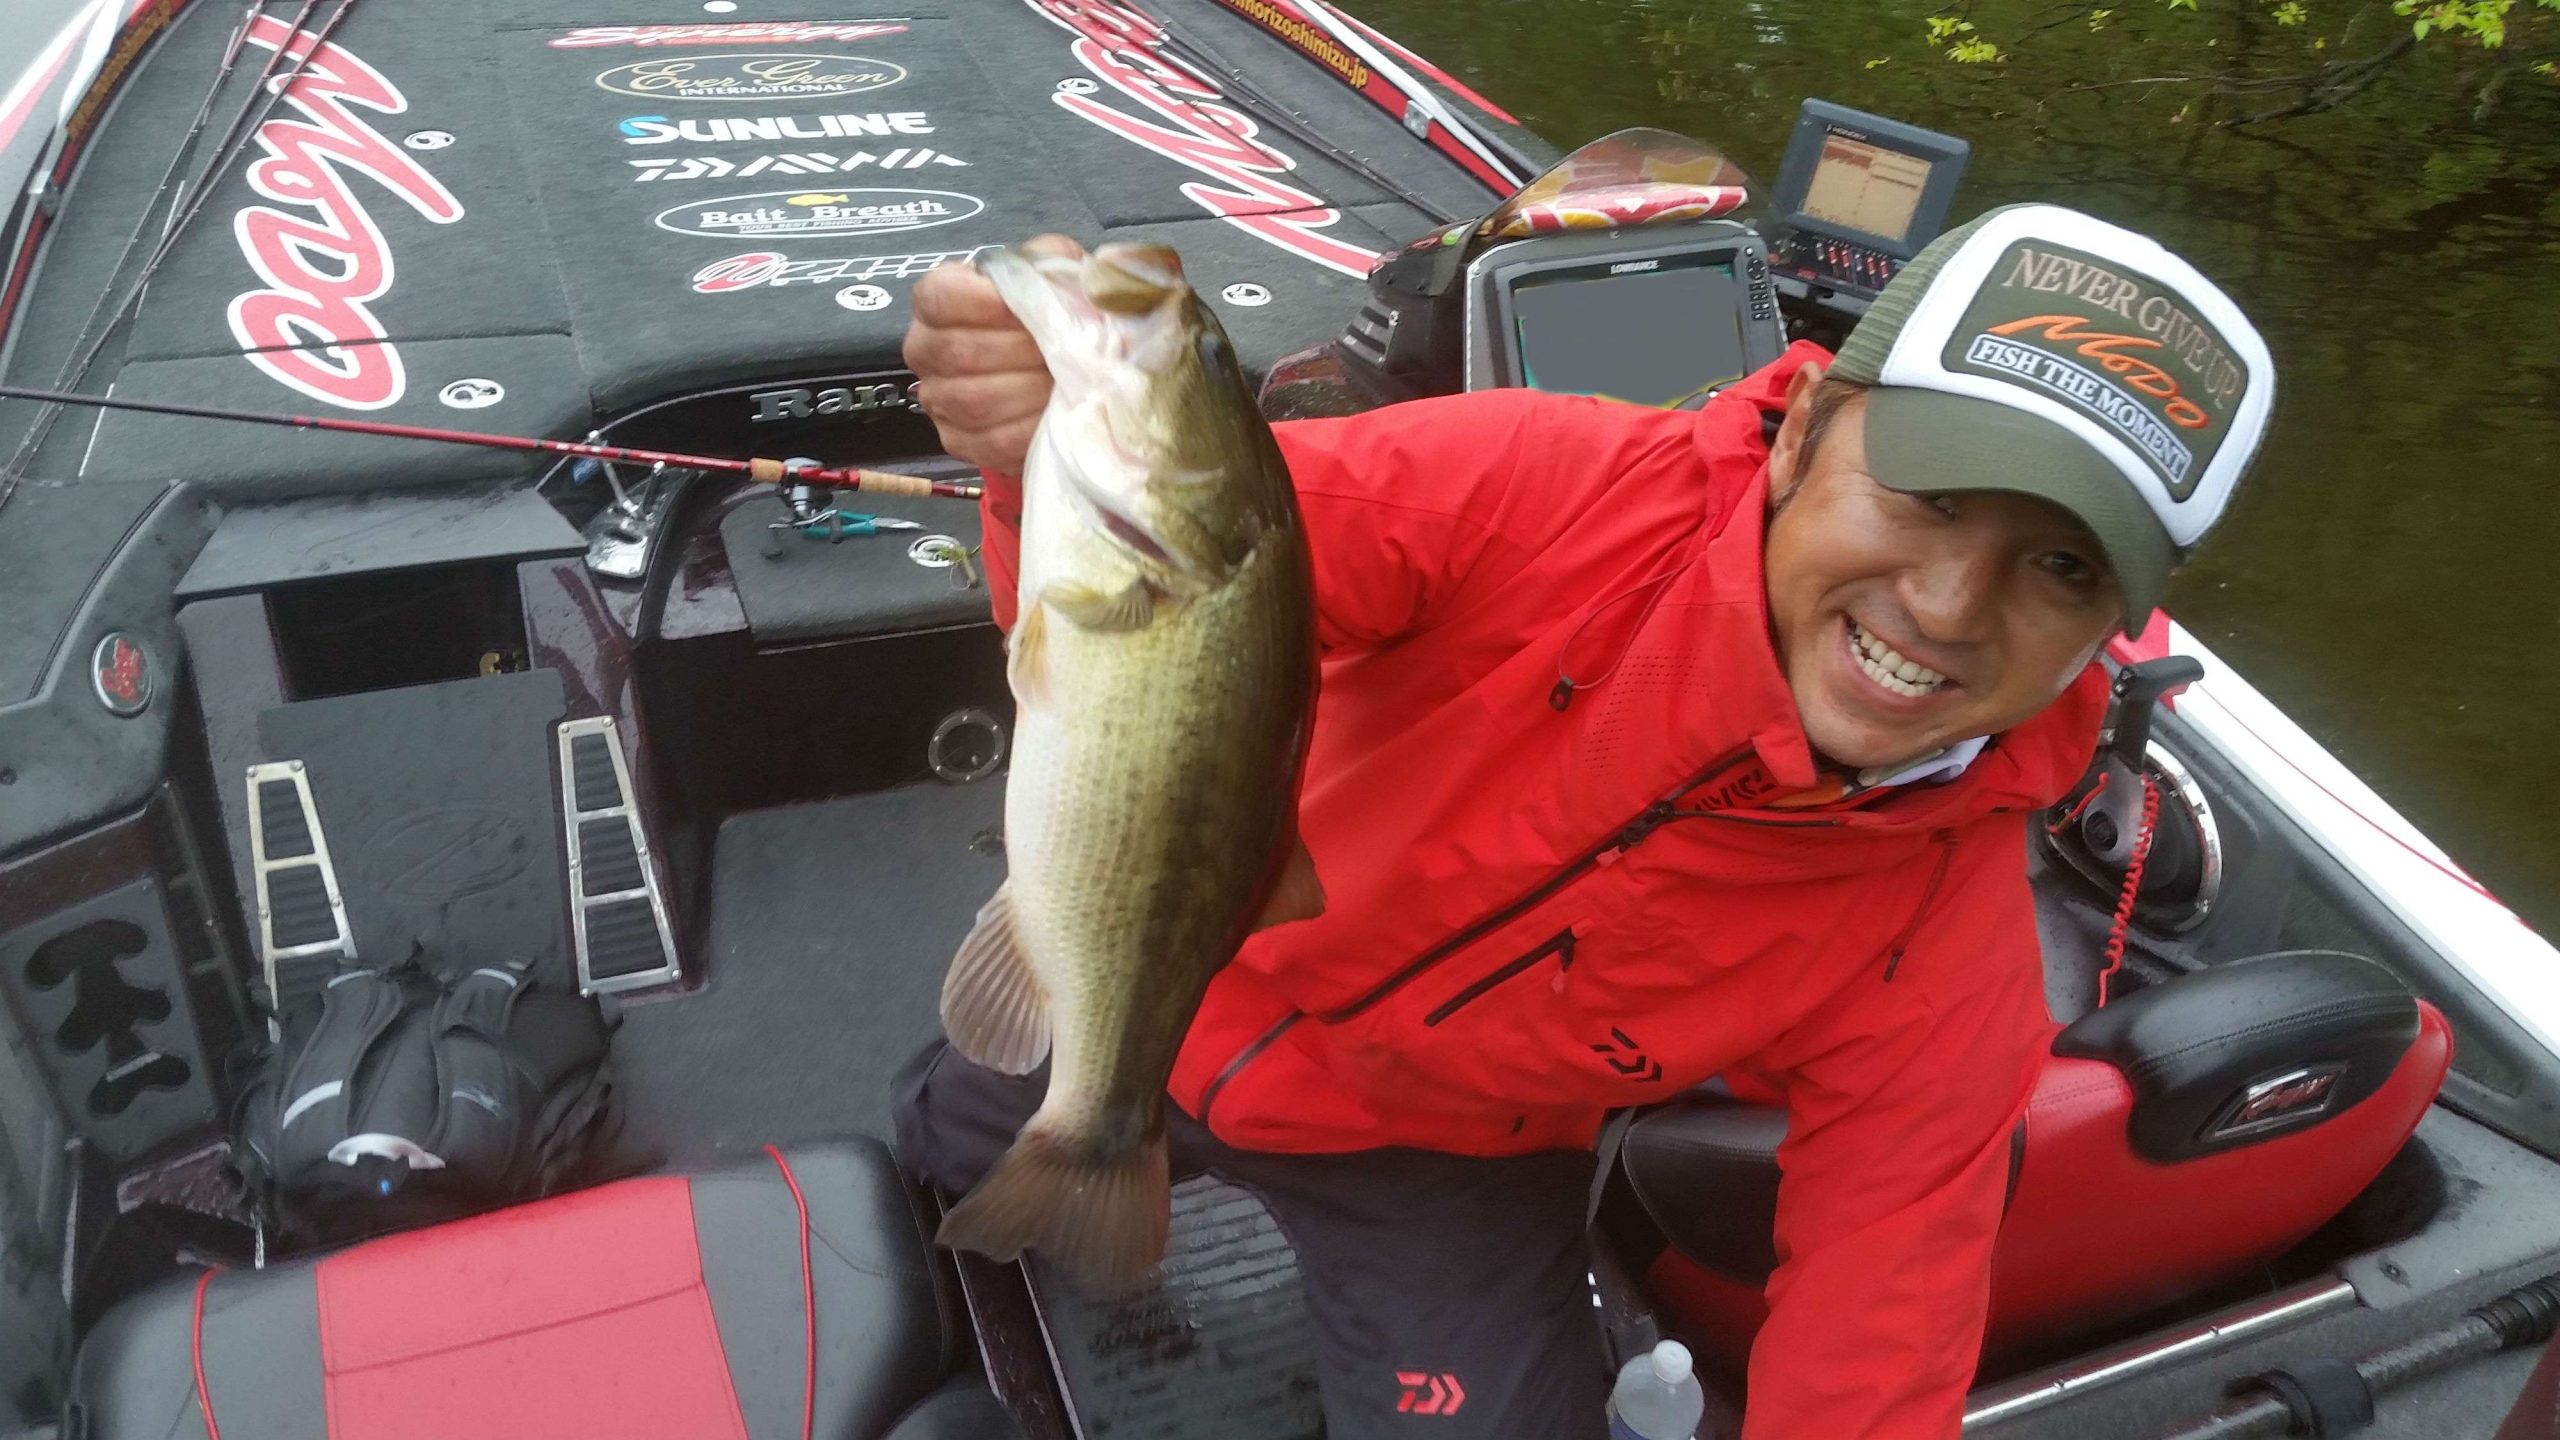 Morizo Shimizu is all smiles after landing a nice 3-pounder for his third keeper.